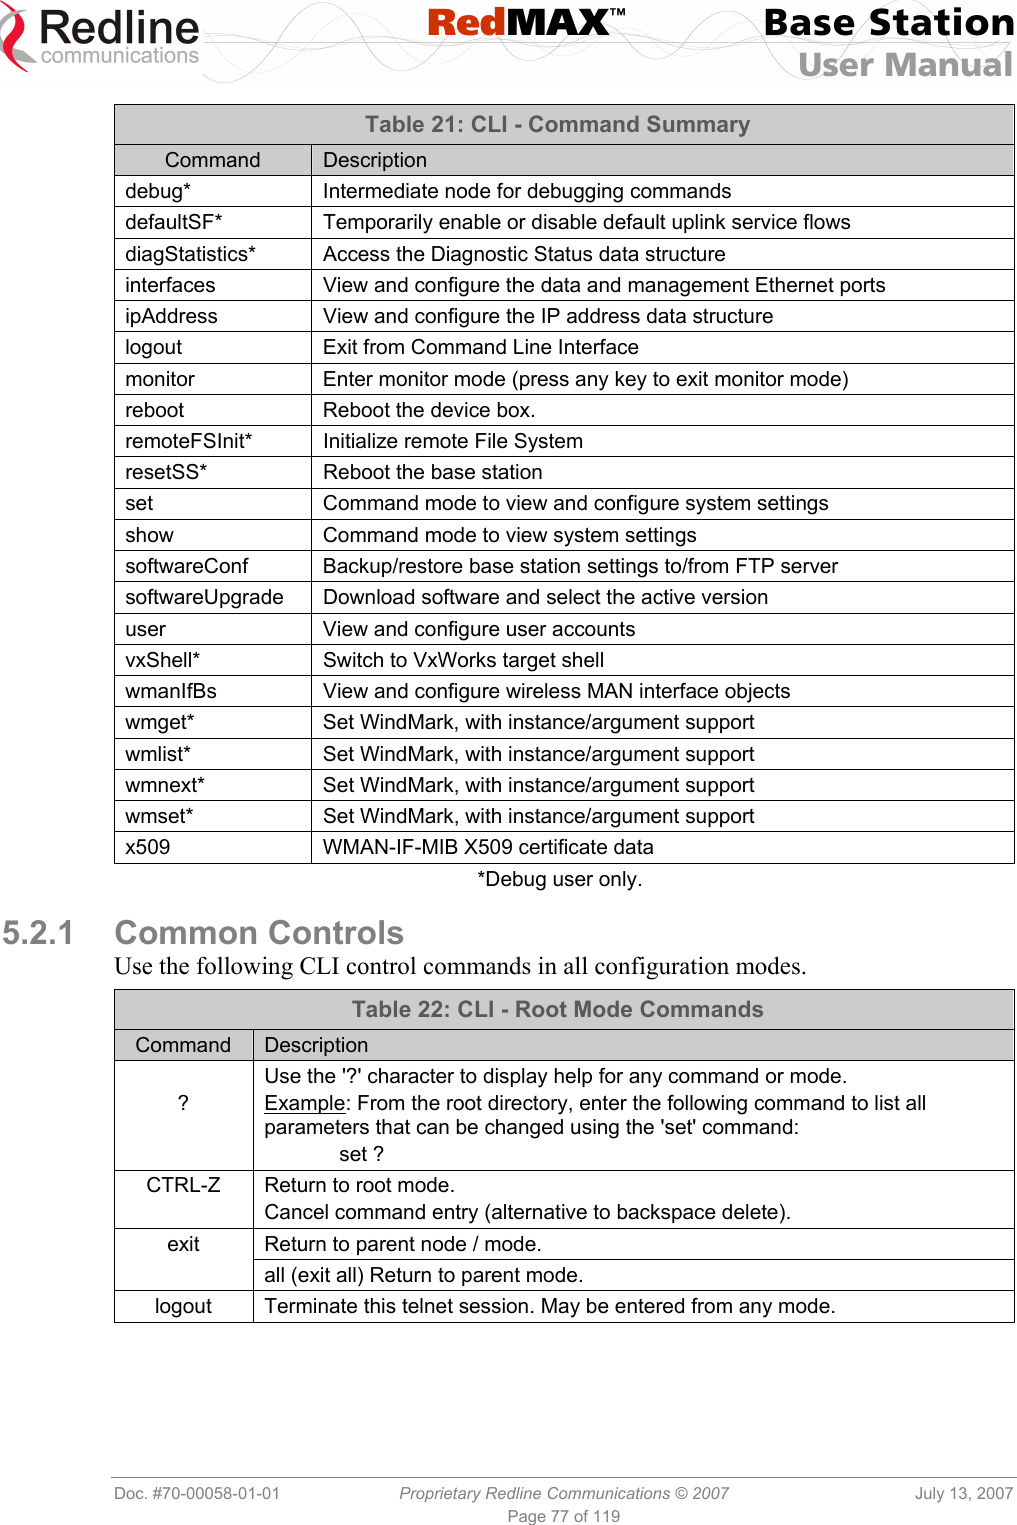  RedMAX™ Base Station User Manual   Doc. #70-00058-01-01  Proprietary Redline Communications © 2007  July 13, 2007 Page 77 of 119 Table 21: CLI - Command Summary Command  Description debug*  Intermediate node for debugging commands defaultSF*  Temporarily enable or disable default uplink service flows diagStatistics*  Access the Diagnostic Status data structure interfaces  View and configure the data and management Ethernet ports ipAddress View and configure the IP address data structure logout  Exit from Command Line Interface monitor  Enter monitor mode (press any key to exit monitor mode) reboot  Reboot the device box. remoteFSInit*  Initialize remote File System resetSS*  Reboot the base station  set  Command mode to view and configure system settings show  Command mode to view system settings softwareConf  Backup/restore base station settings to/from FTP server softwareUpgrade  Download software and select the active version user  View and configure user accounts vxShell*  Switch to VxWorks target shell wmanIfBs  View and configure wireless MAN interface objects wmget*  Set WindMark, with instance/argument support wmlist*  Set WindMark, with instance/argument support wmnext*  Set WindMark, with instance/argument support wmset*  Set WindMark, with instance/argument support x509  WMAN-IF-MIB X509 certificate data *Debug user only.  5.2.1 Common Controls Use the following CLI control commands in all configuration modes. Table 22: CLI - Root Mode Commands Command  Description  ? Use the &apos;?&apos; character to display help for any command or mode. Example: From the root directory, enter the following command to list all parameters that can be changed using the &apos;set&apos; command:  set ? CTRL-Z  Return to root mode. Cancel command entry (alternative to backspace delete). Return to parent node / mode. exit  all (exit all) Return to parent mode. logout  Terminate this telnet session. May be entered from any mode.  